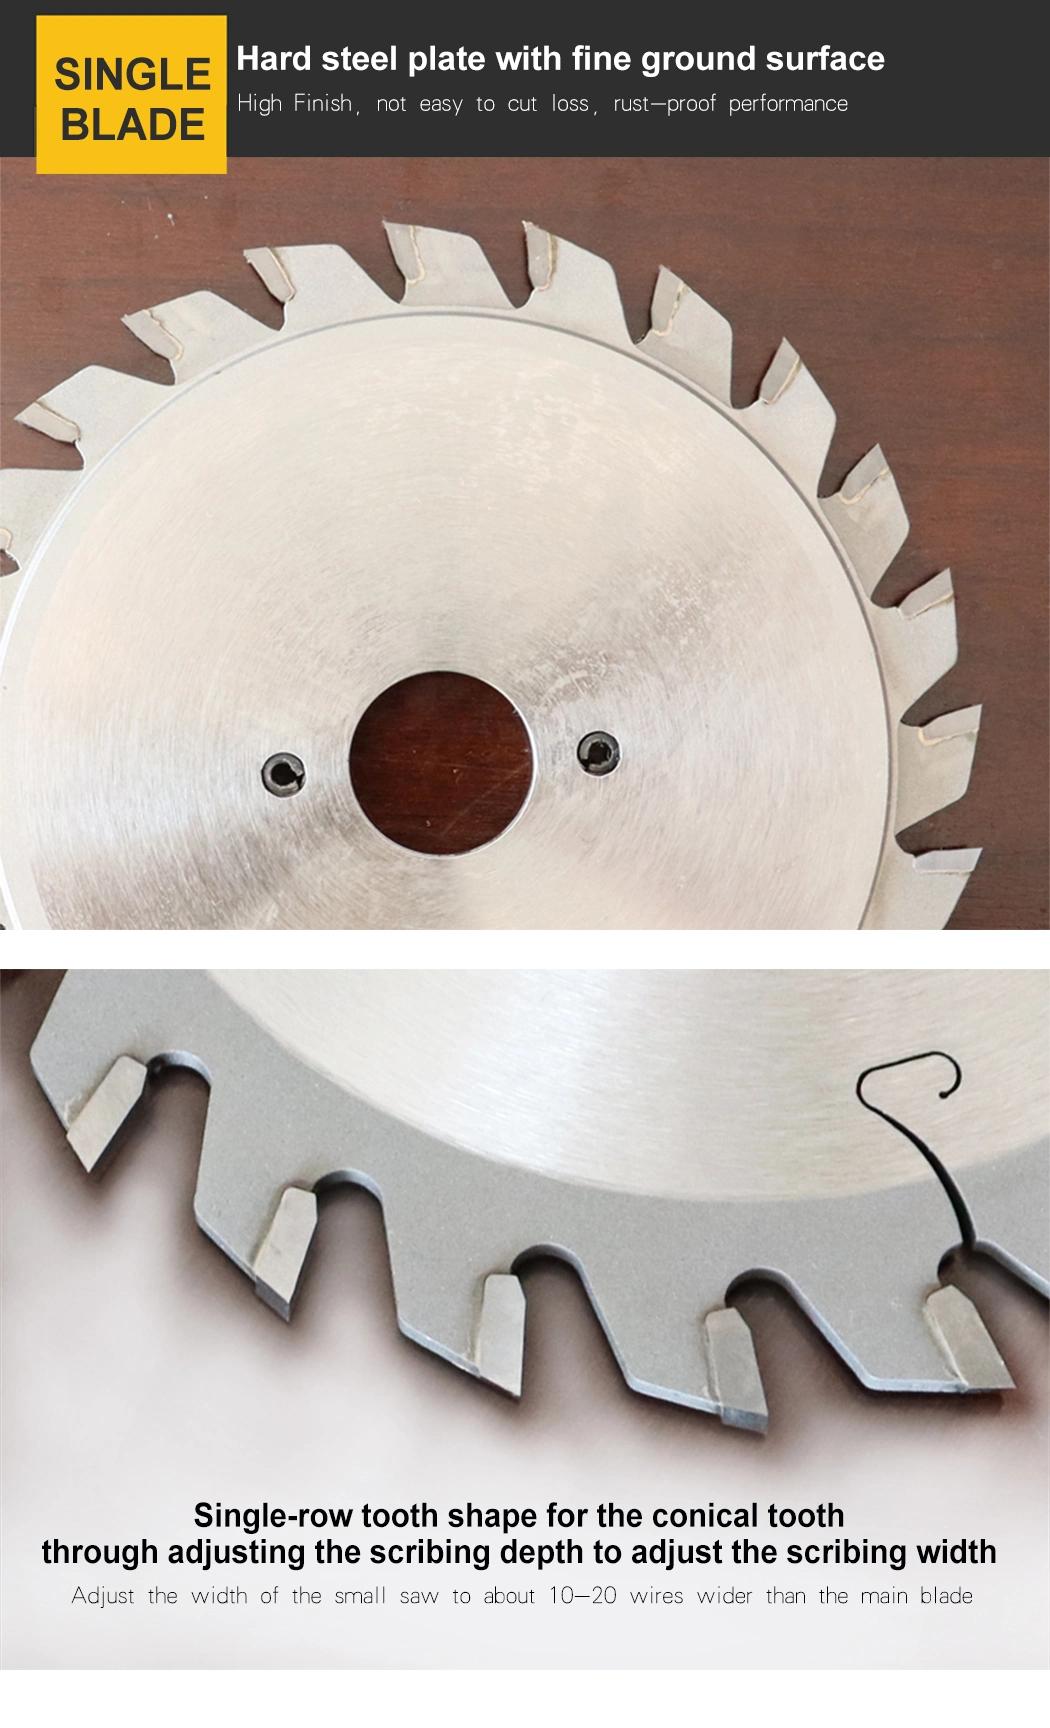 Tct Carbide Alloy Wood Cutting Circular Saw Blade for Woodworking 300 96t